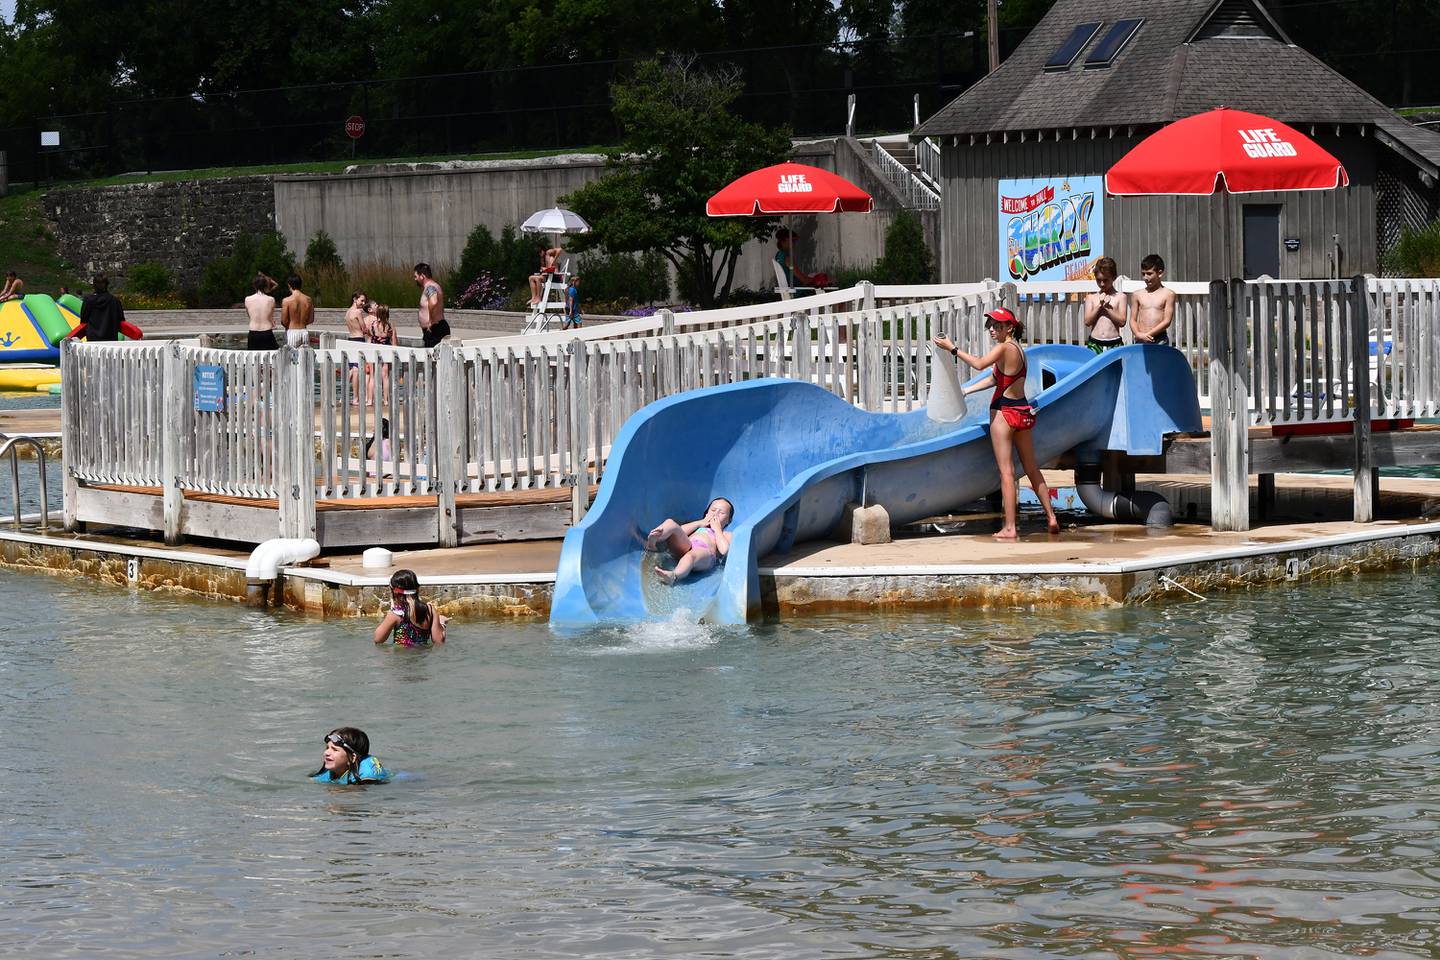 When Batavia's Hall Quarry Beach reopens on Saturday, May 25, attendees will have access to a diving tower, a drop slide and more.